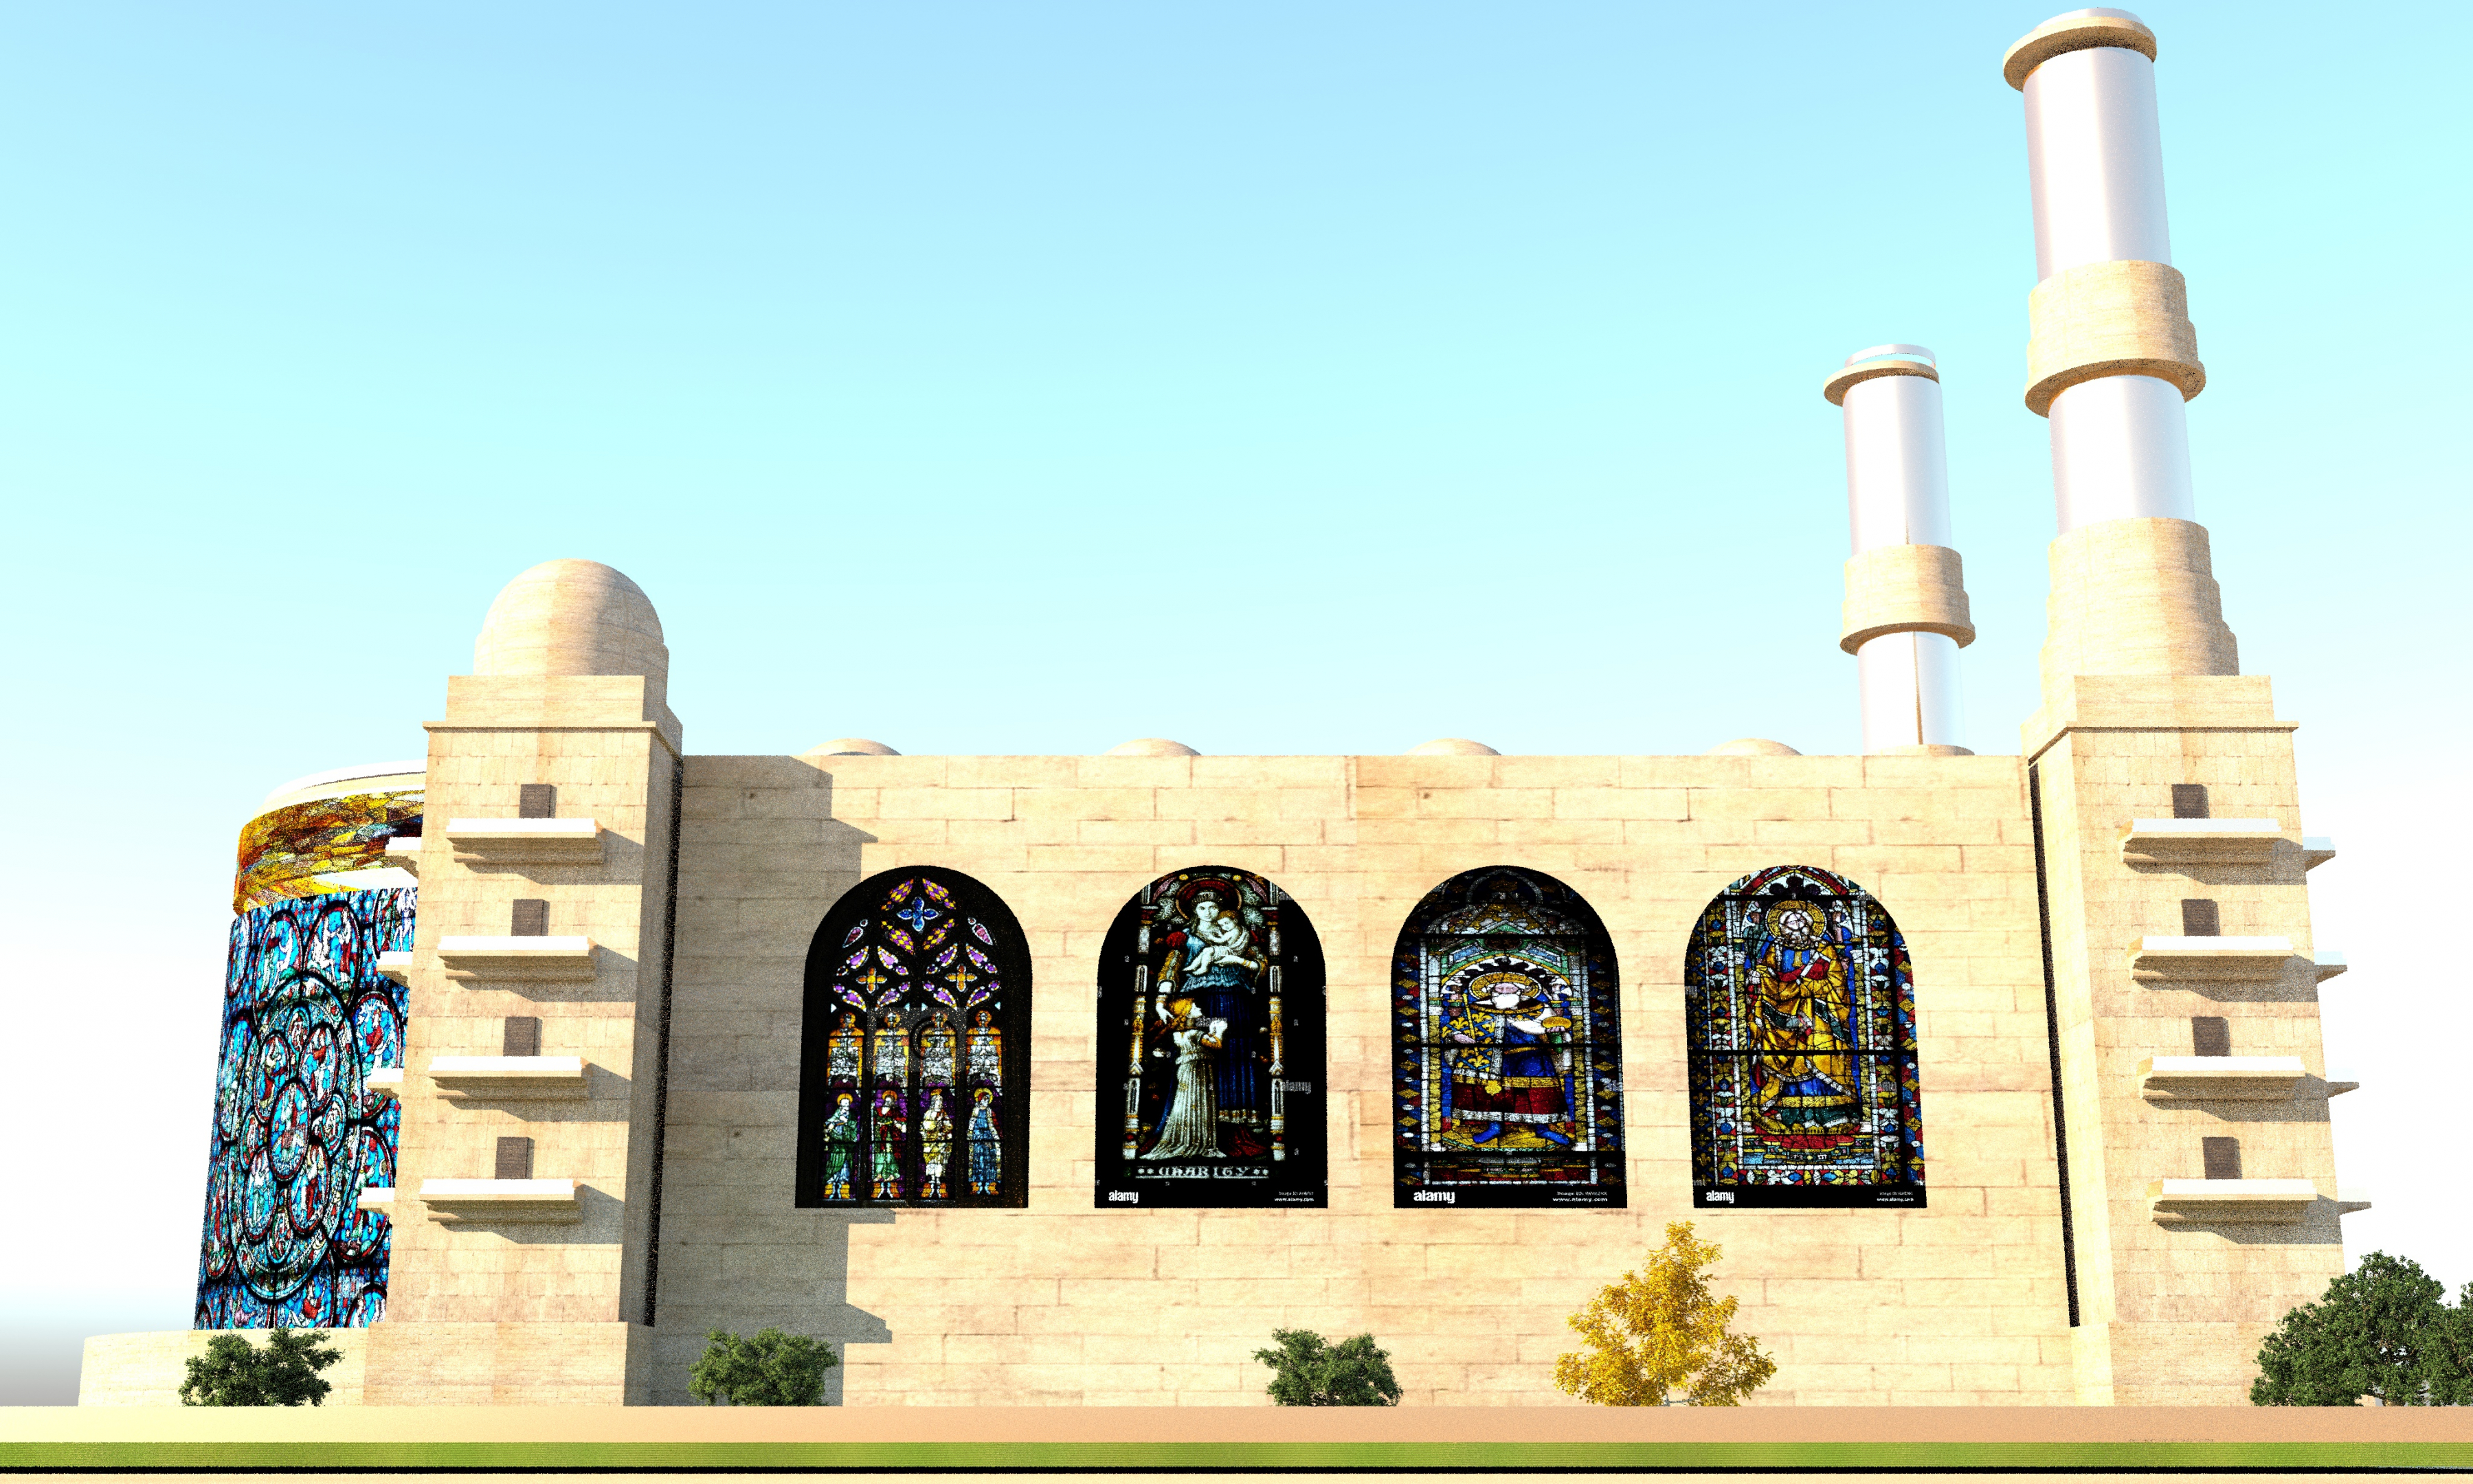 Fictional cathedral with golden towers in AutoCAD vray 3.0 image